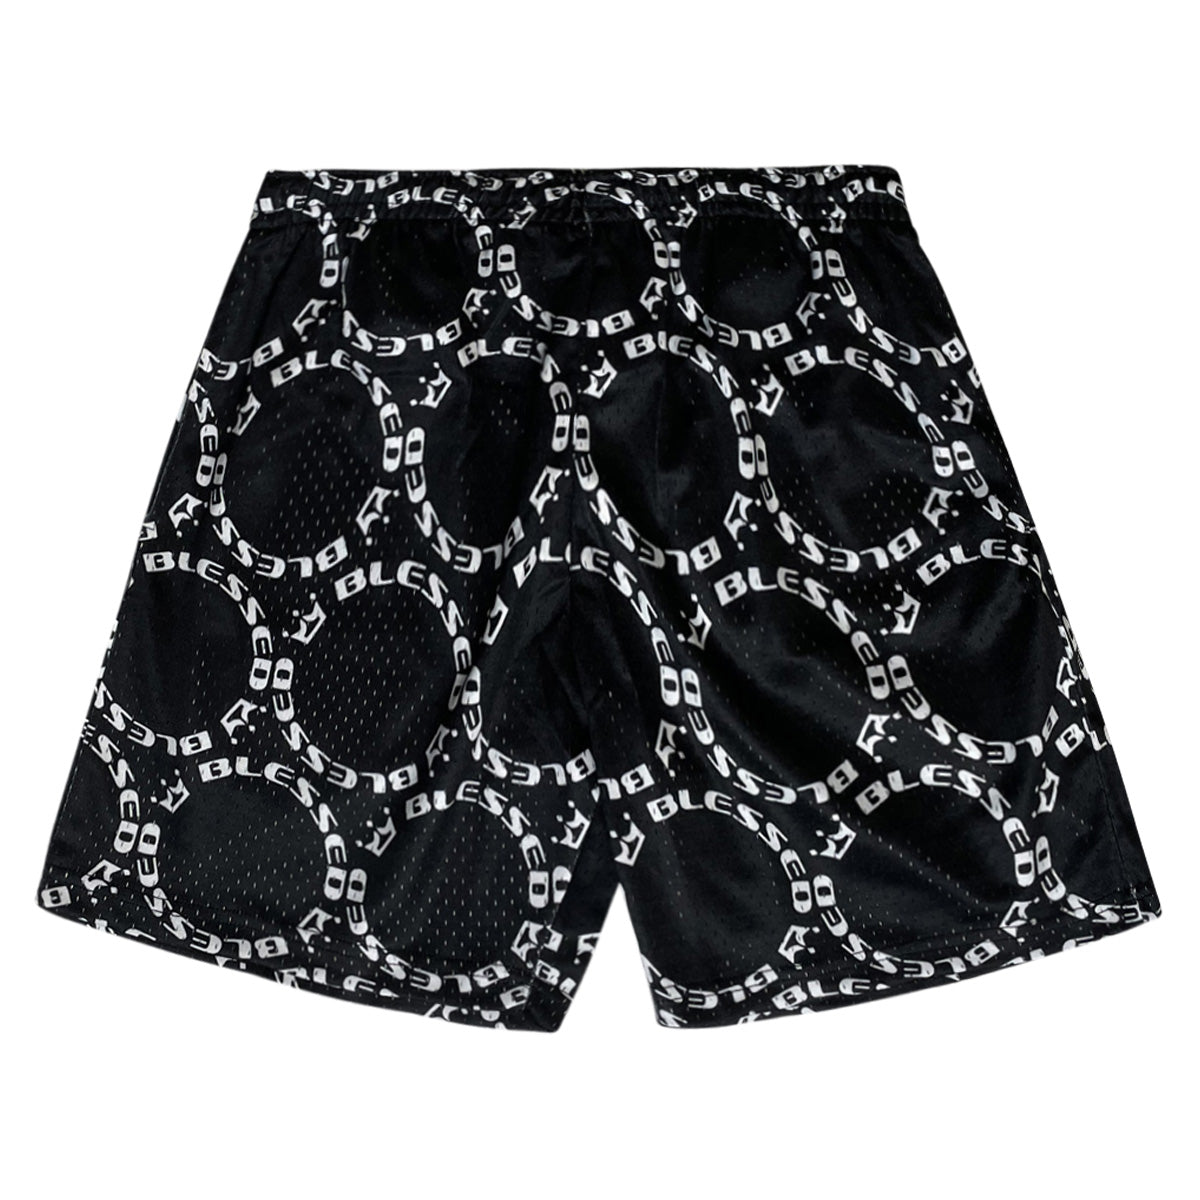 CYBER MONDAY Blessed Mesh “Full Circle”Basketball Shorts